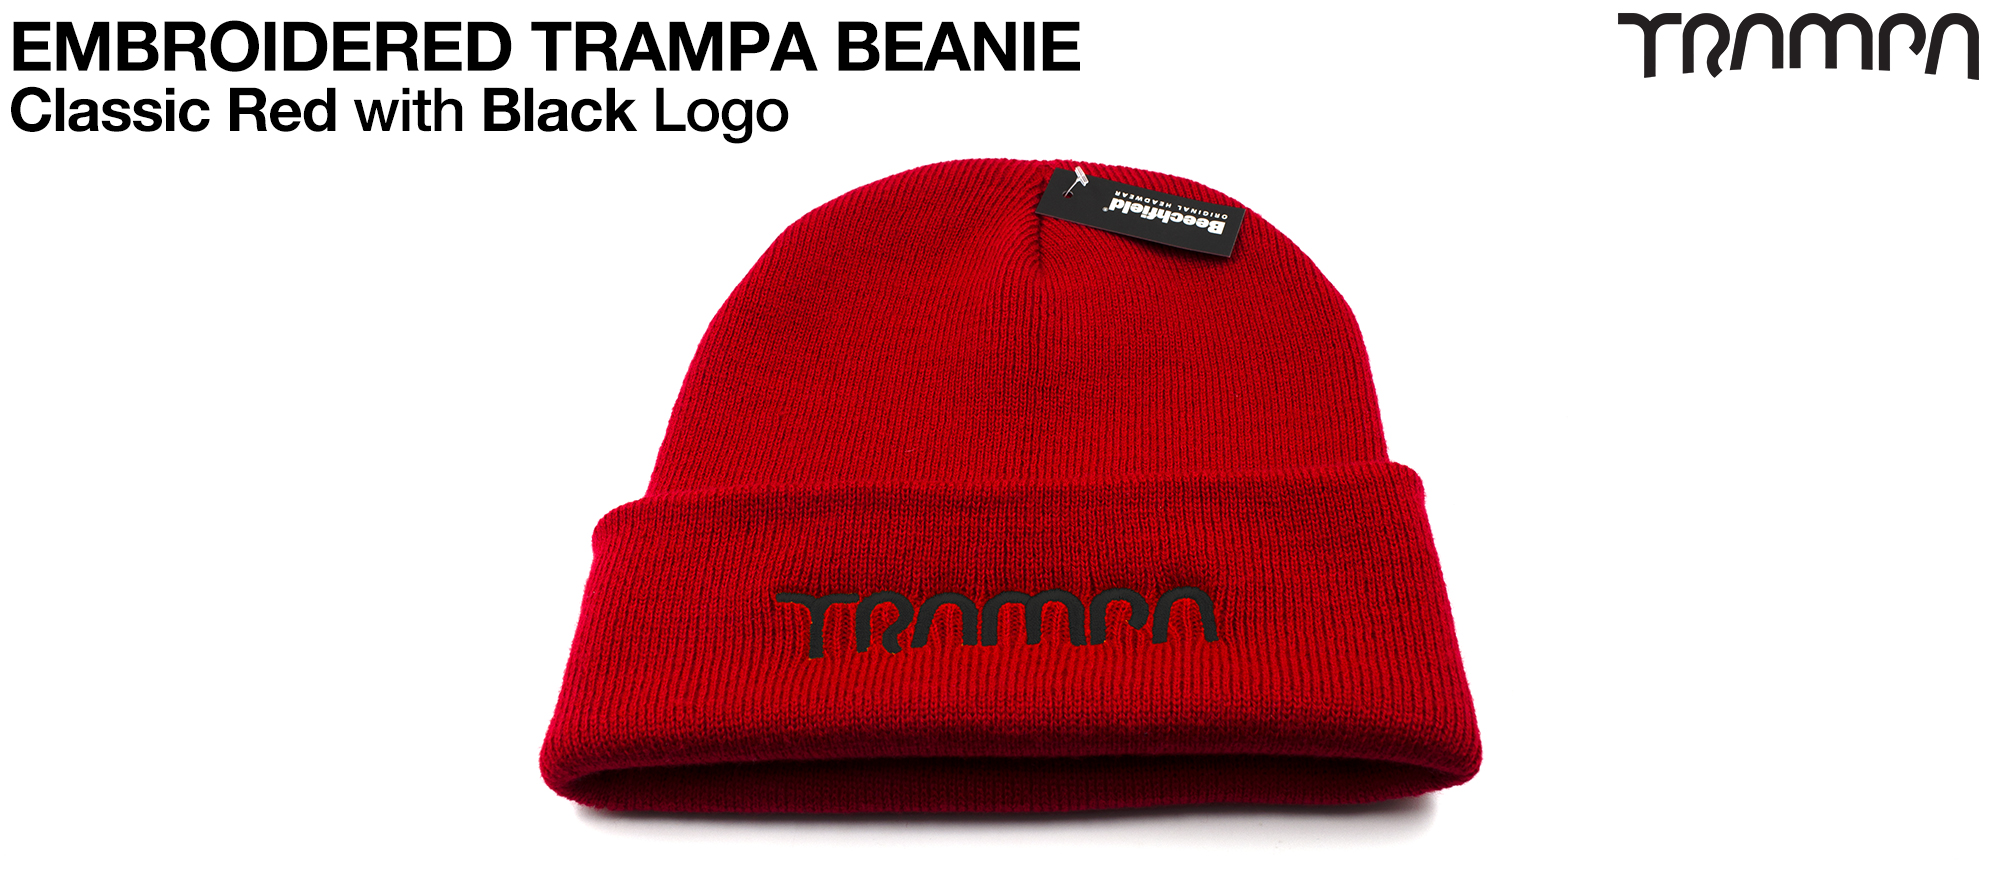 RED Woolly Hat with BLACK TRAMPA Embroidery - Double thick turn over for extra warmth